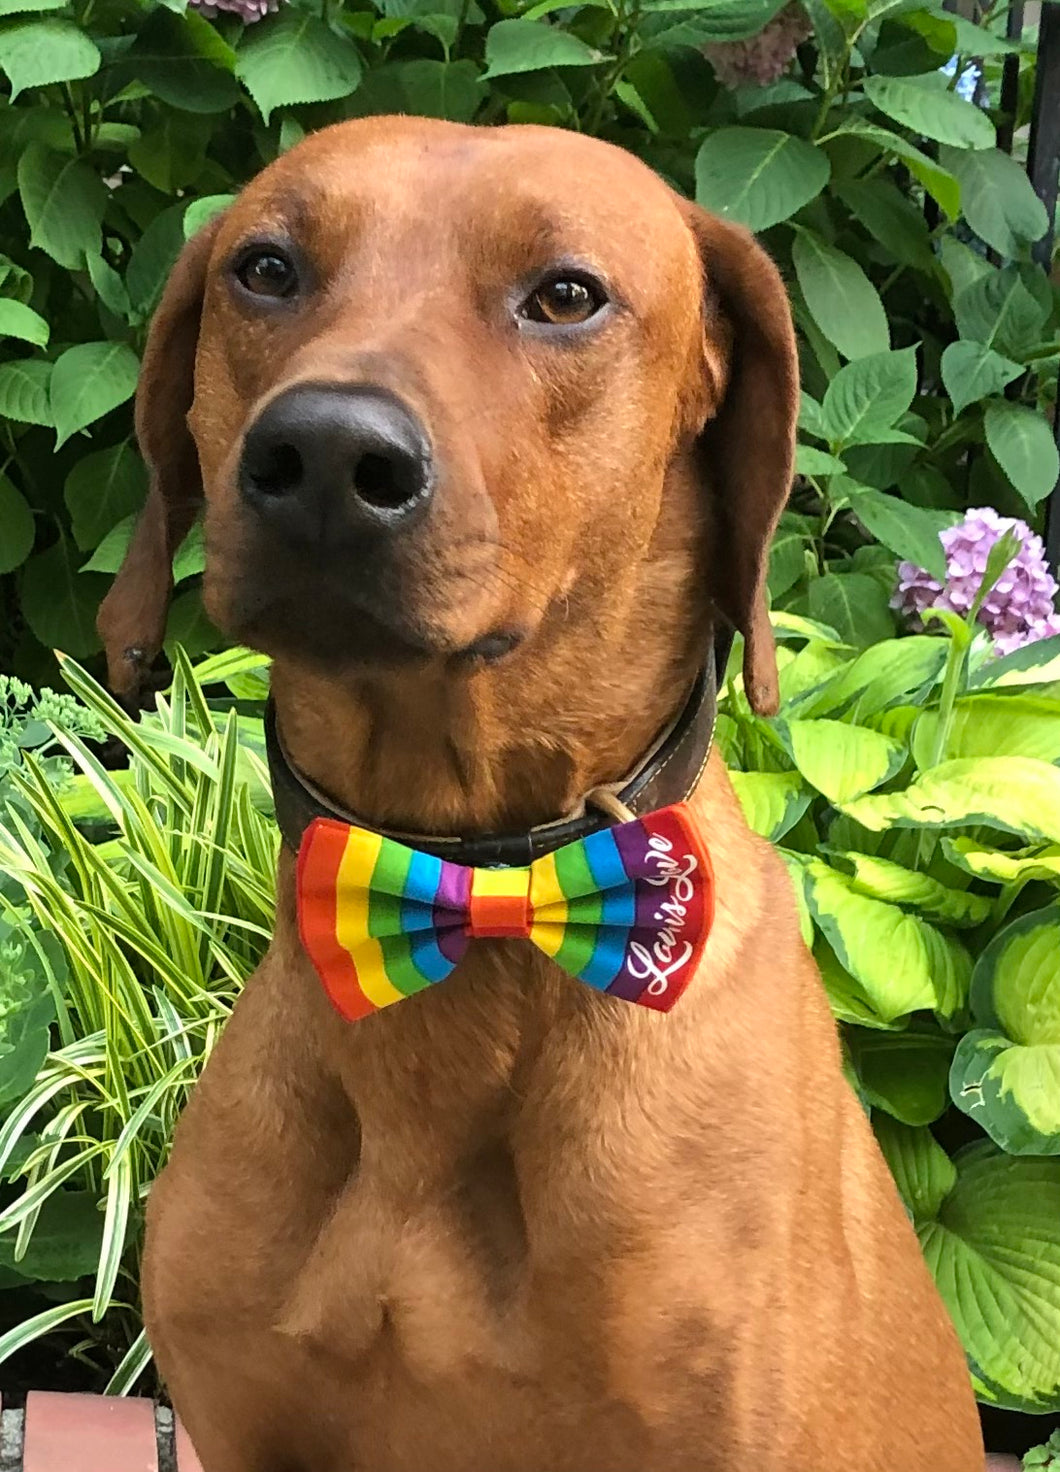 Koa's Ruff life, love is love rainbow pride bow tie. Show your support tot he LGBT community and choose love.